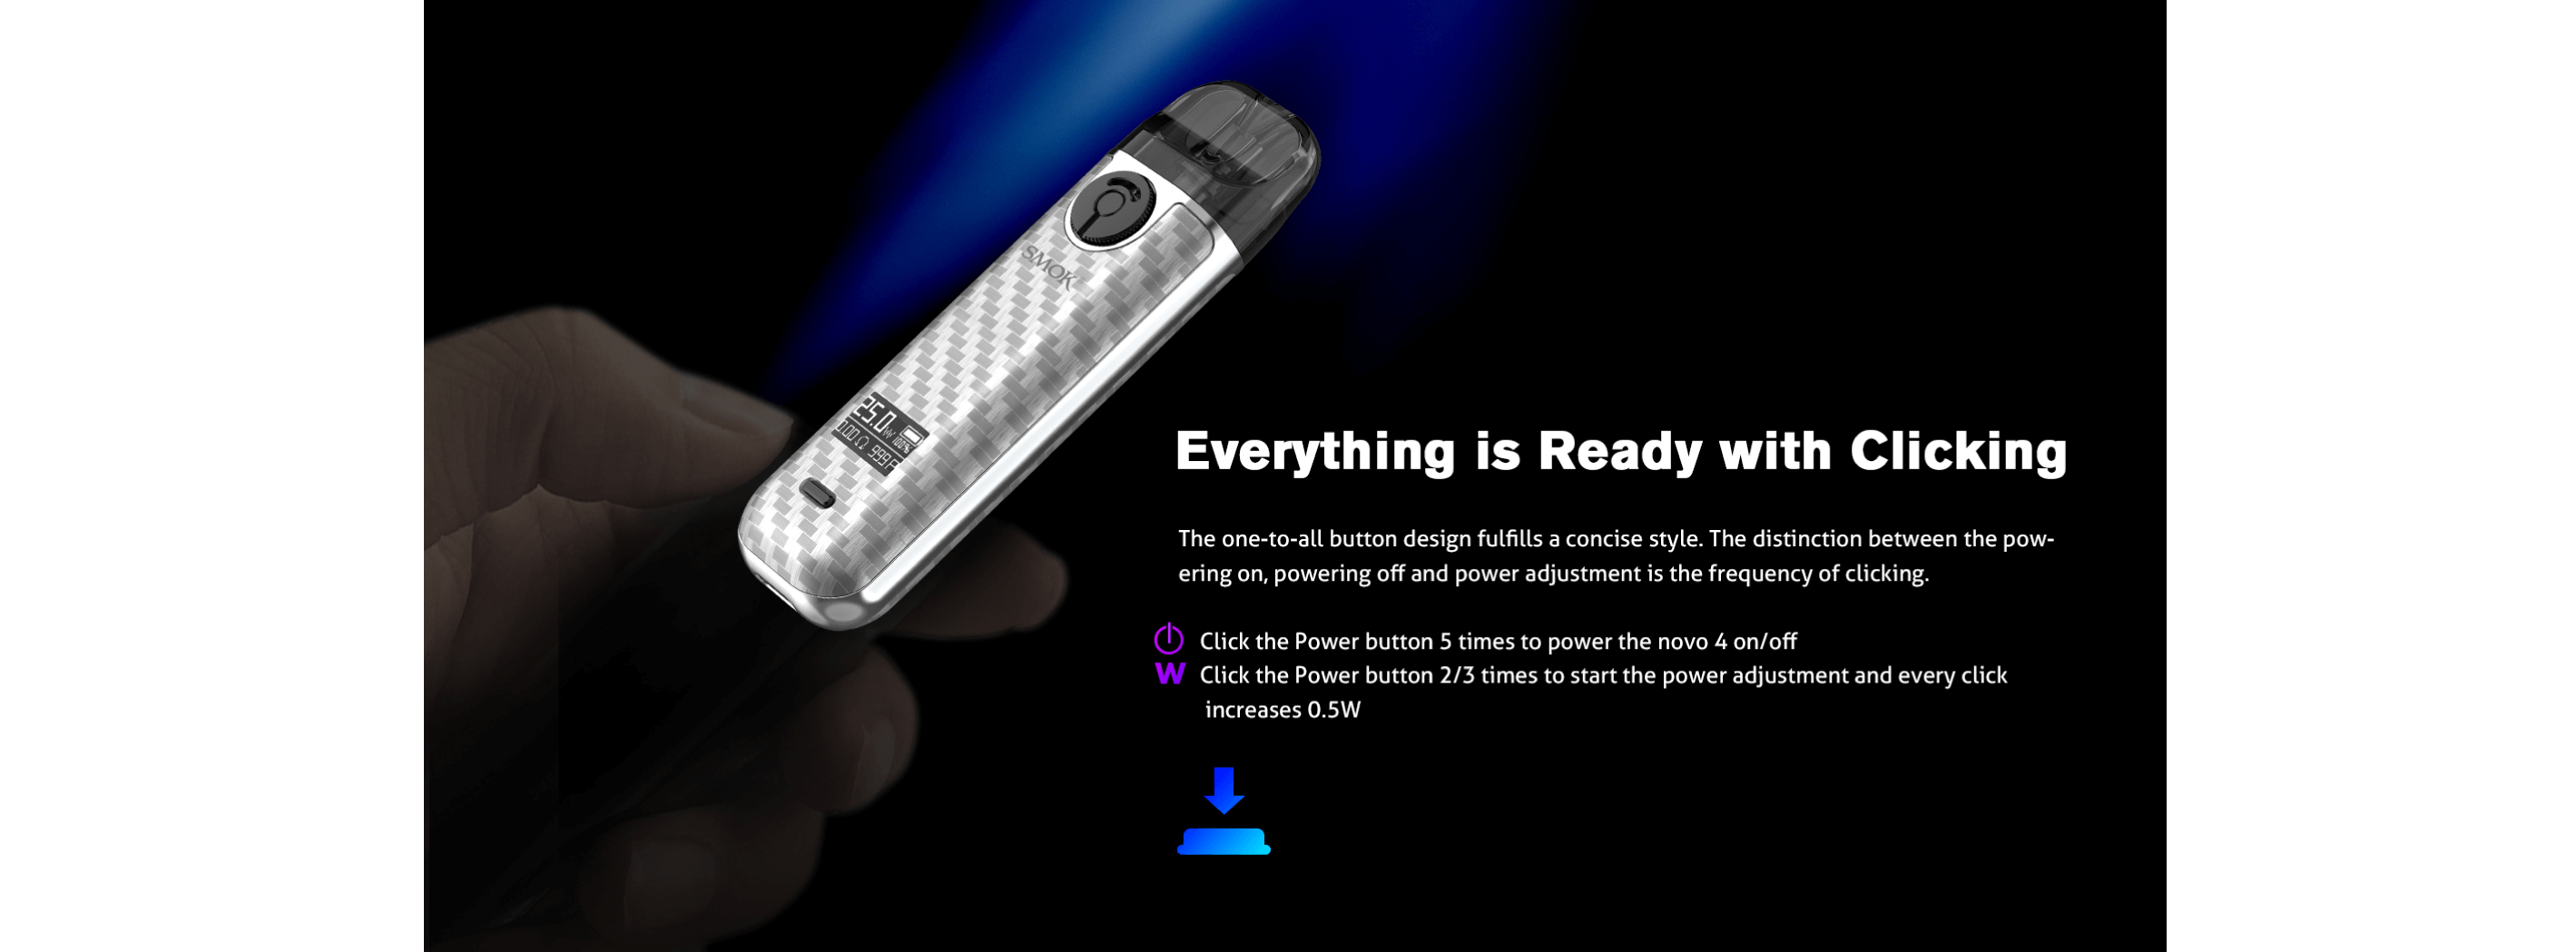 Smok Novo everything is ready with clicking